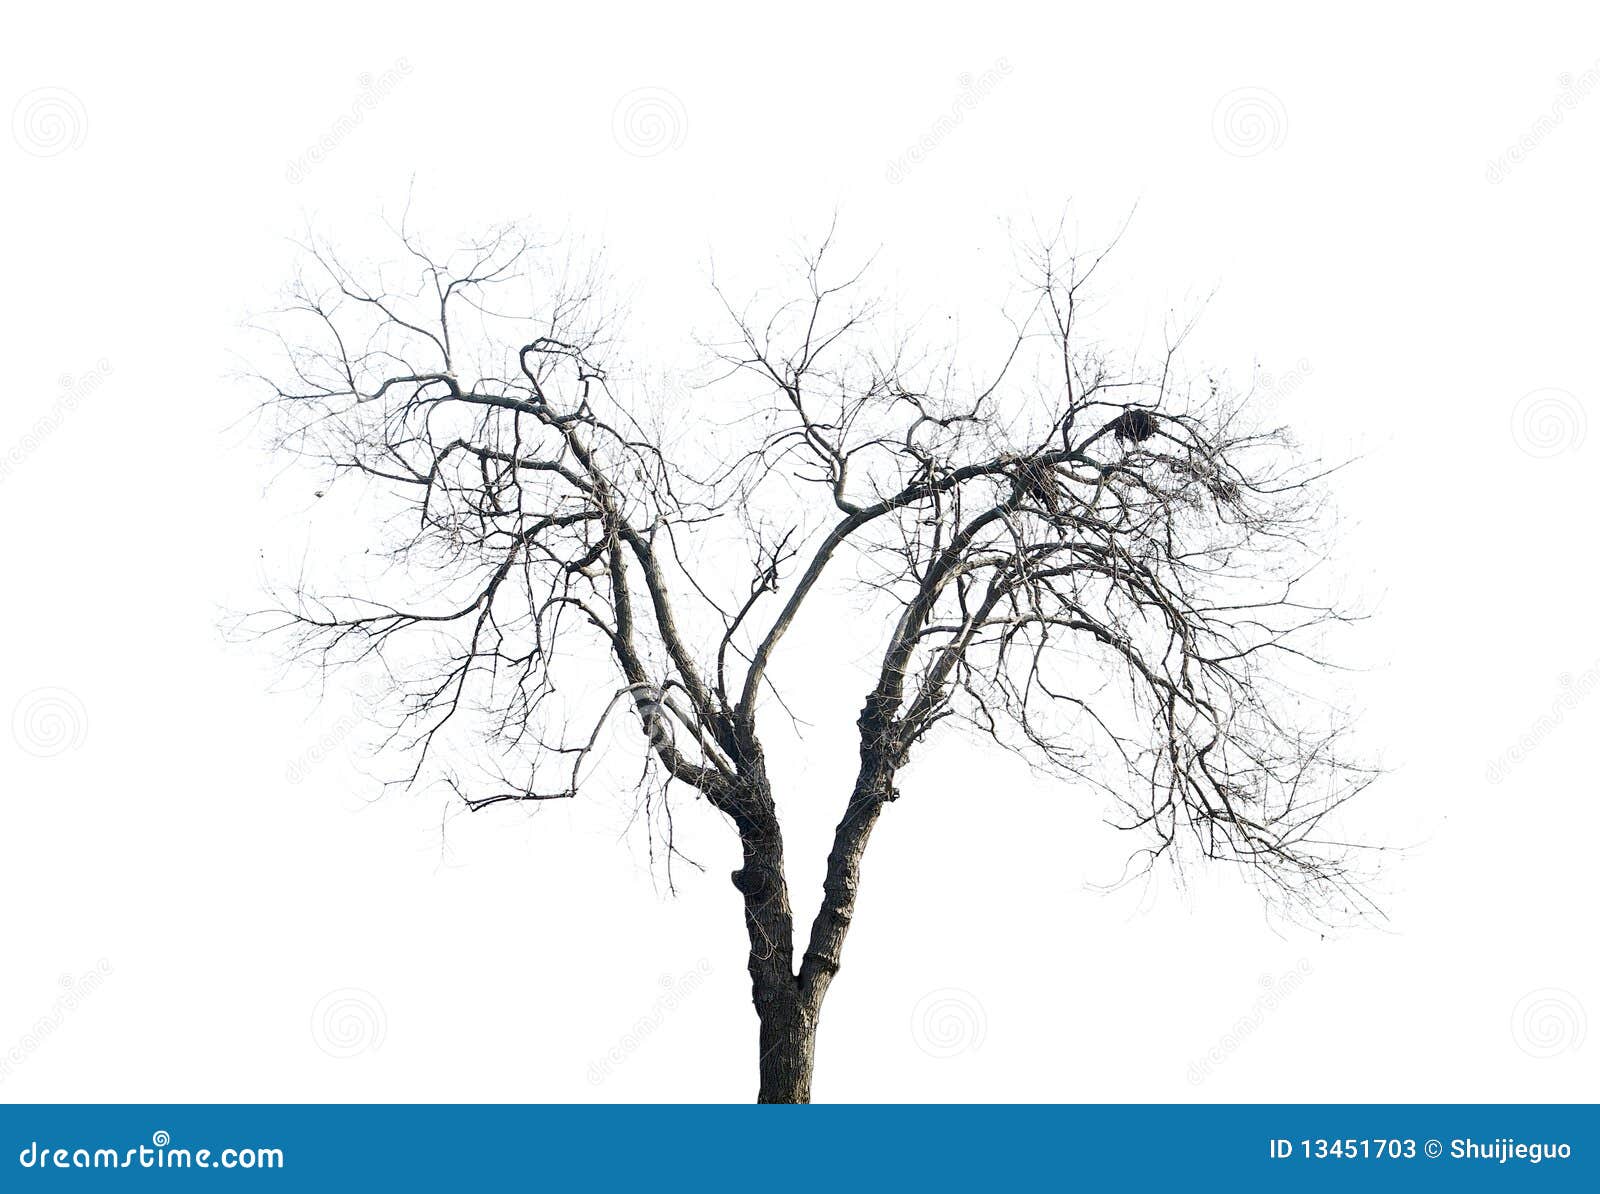 withered branches